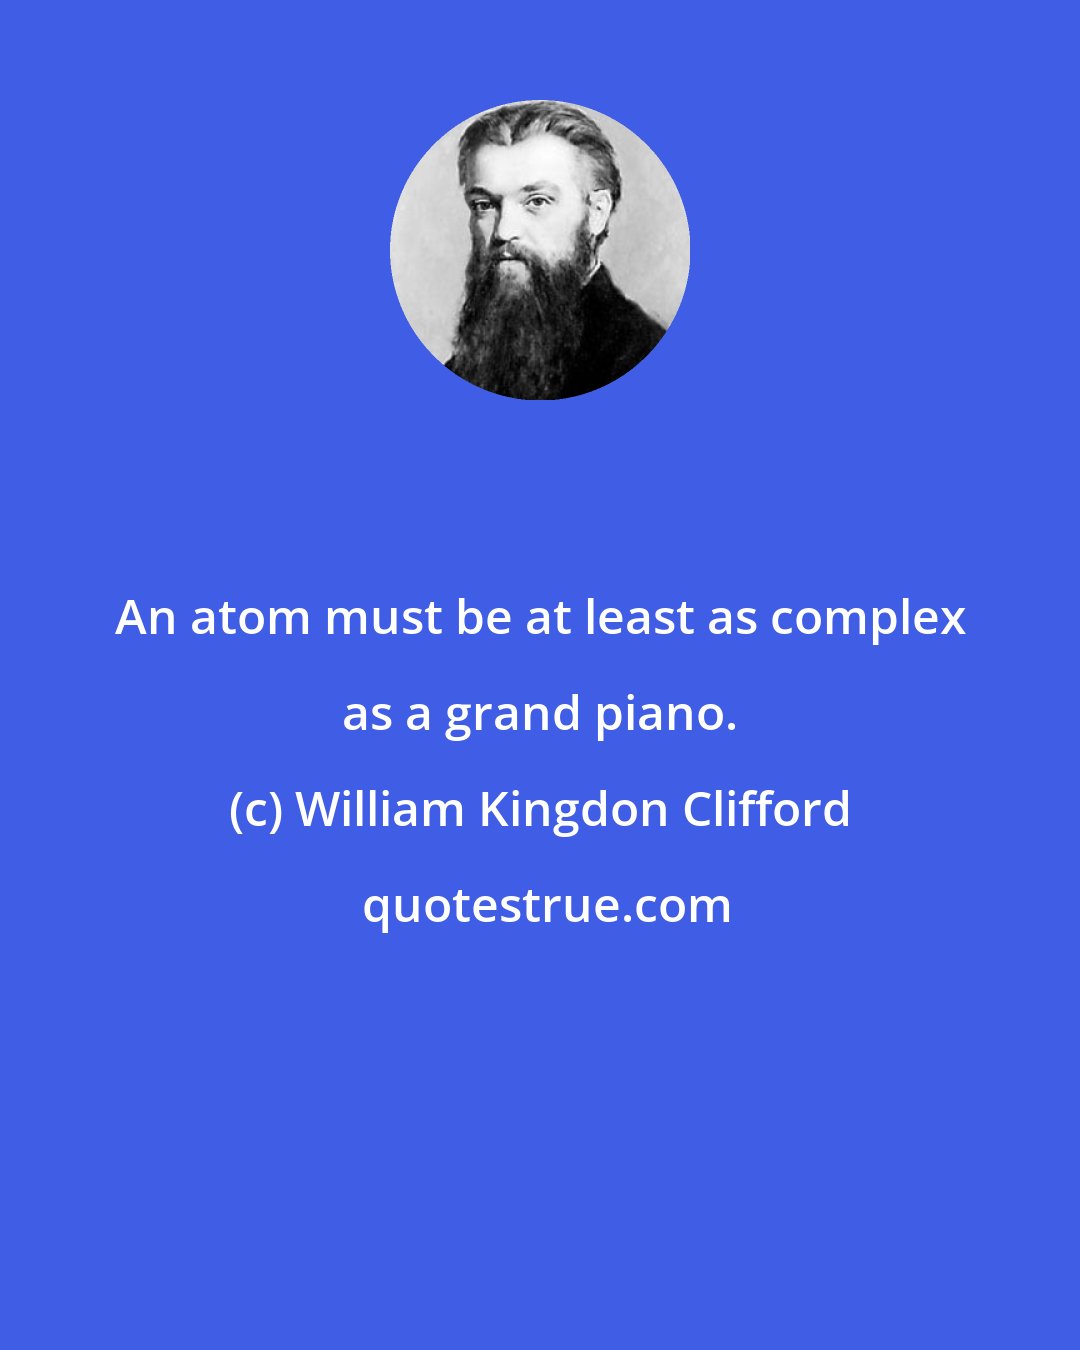 William Kingdon Clifford: An atom must be at least as complex as a grand piano.